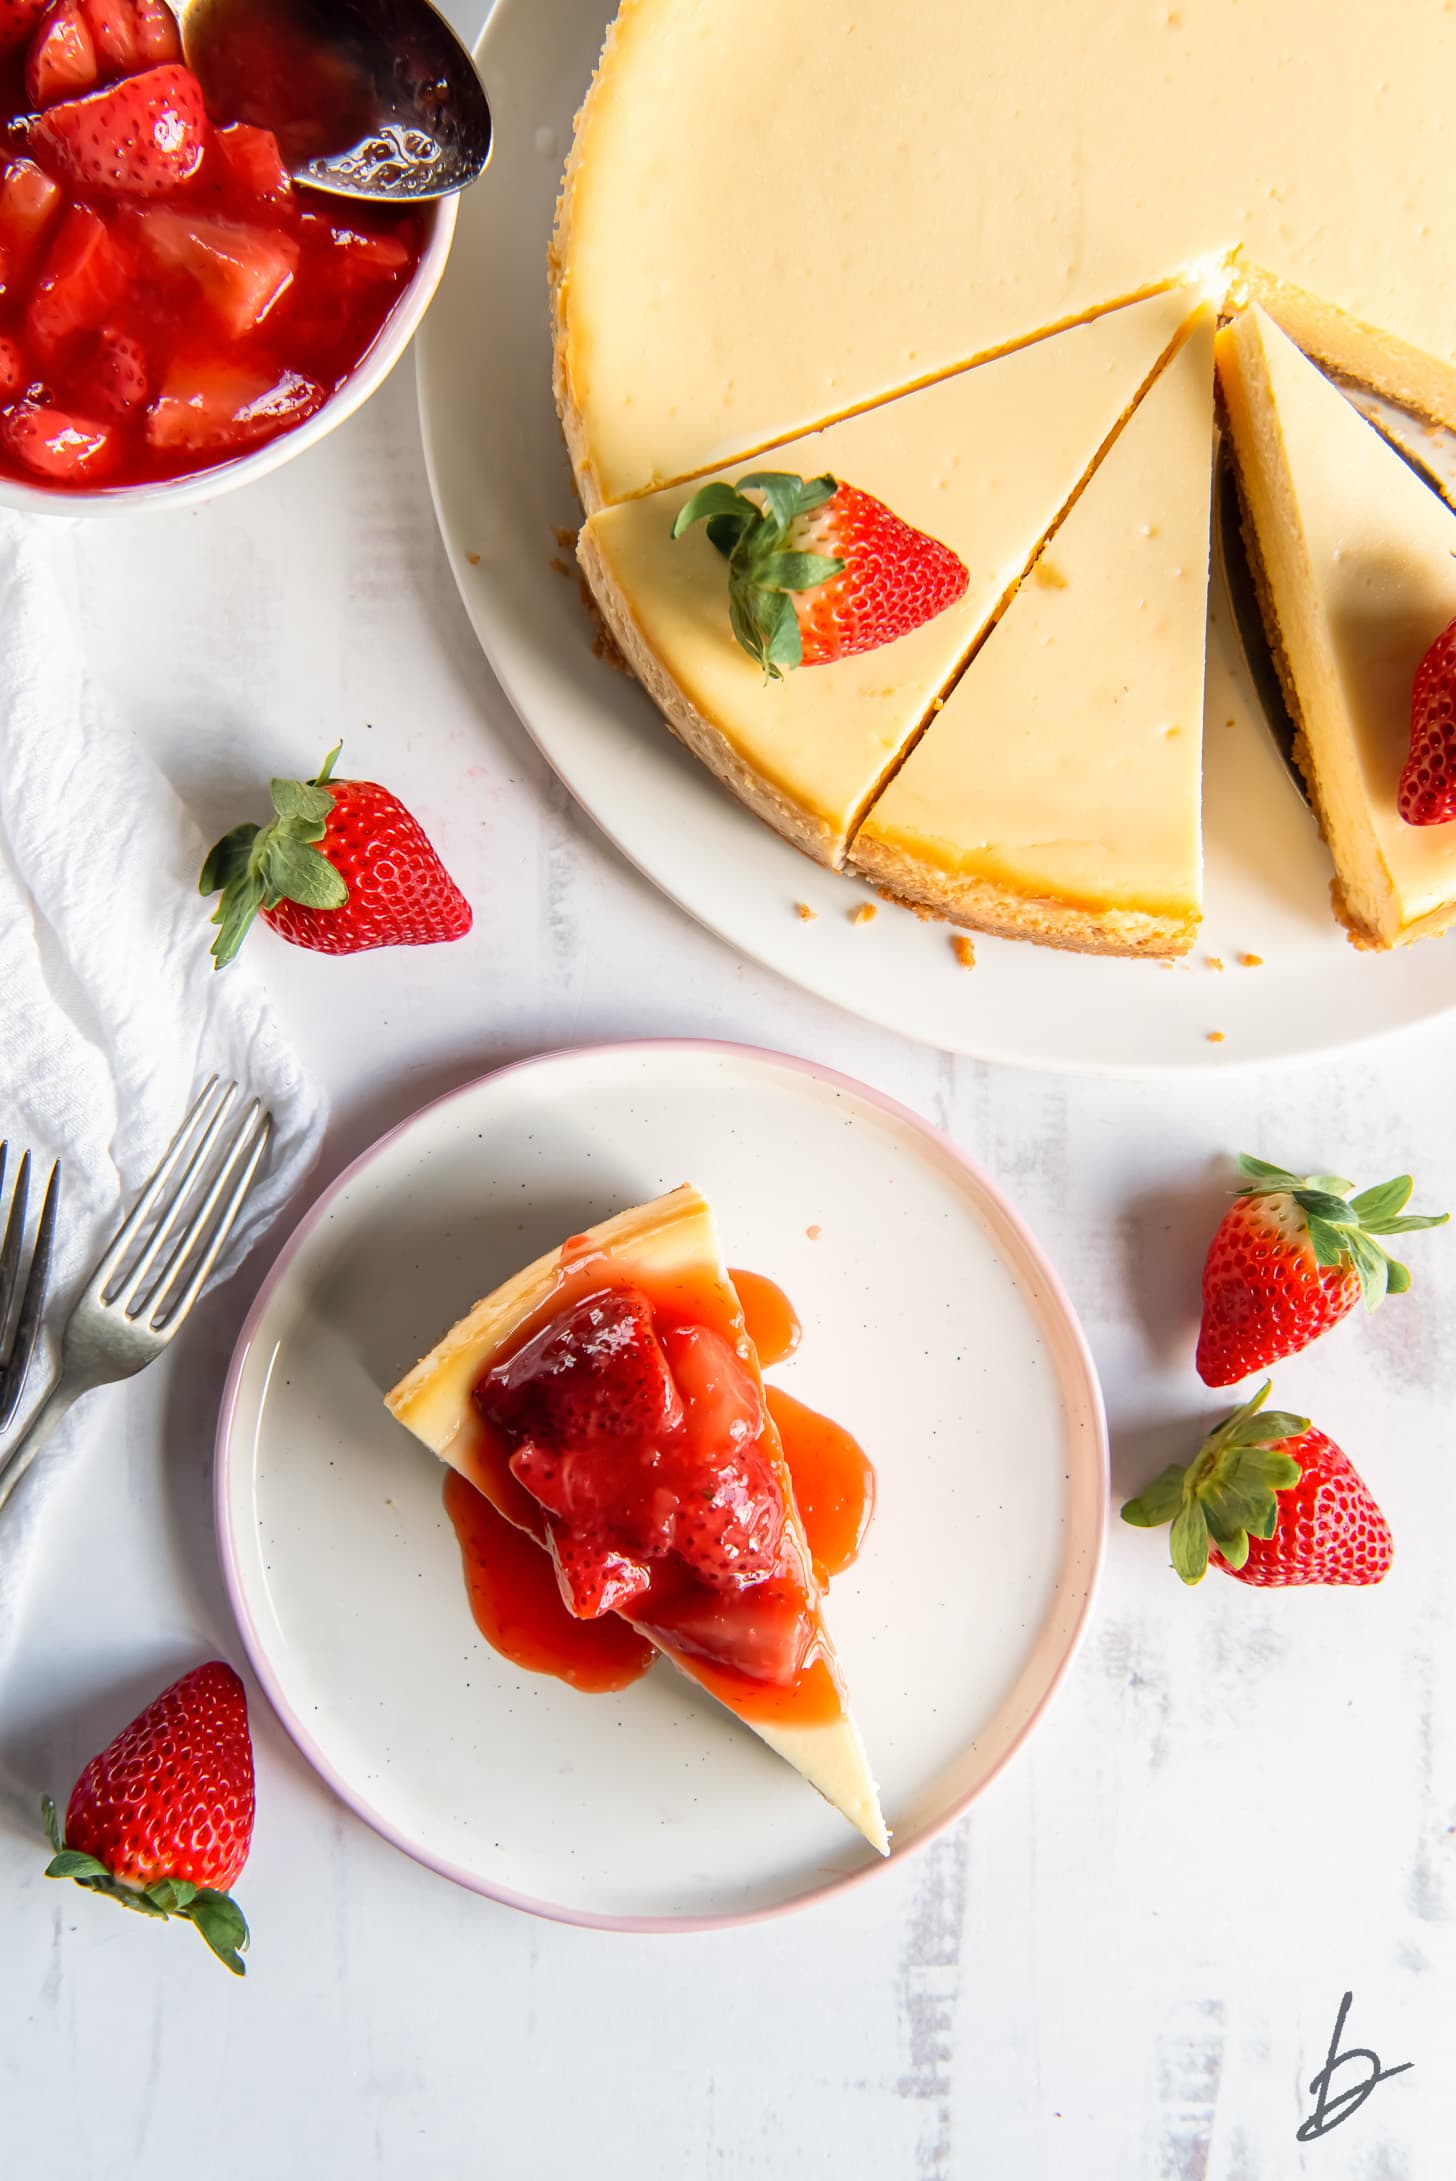 slice of cheesecake topped with strawberry sauce on plate next to whole cheesecake and fresh strawberries